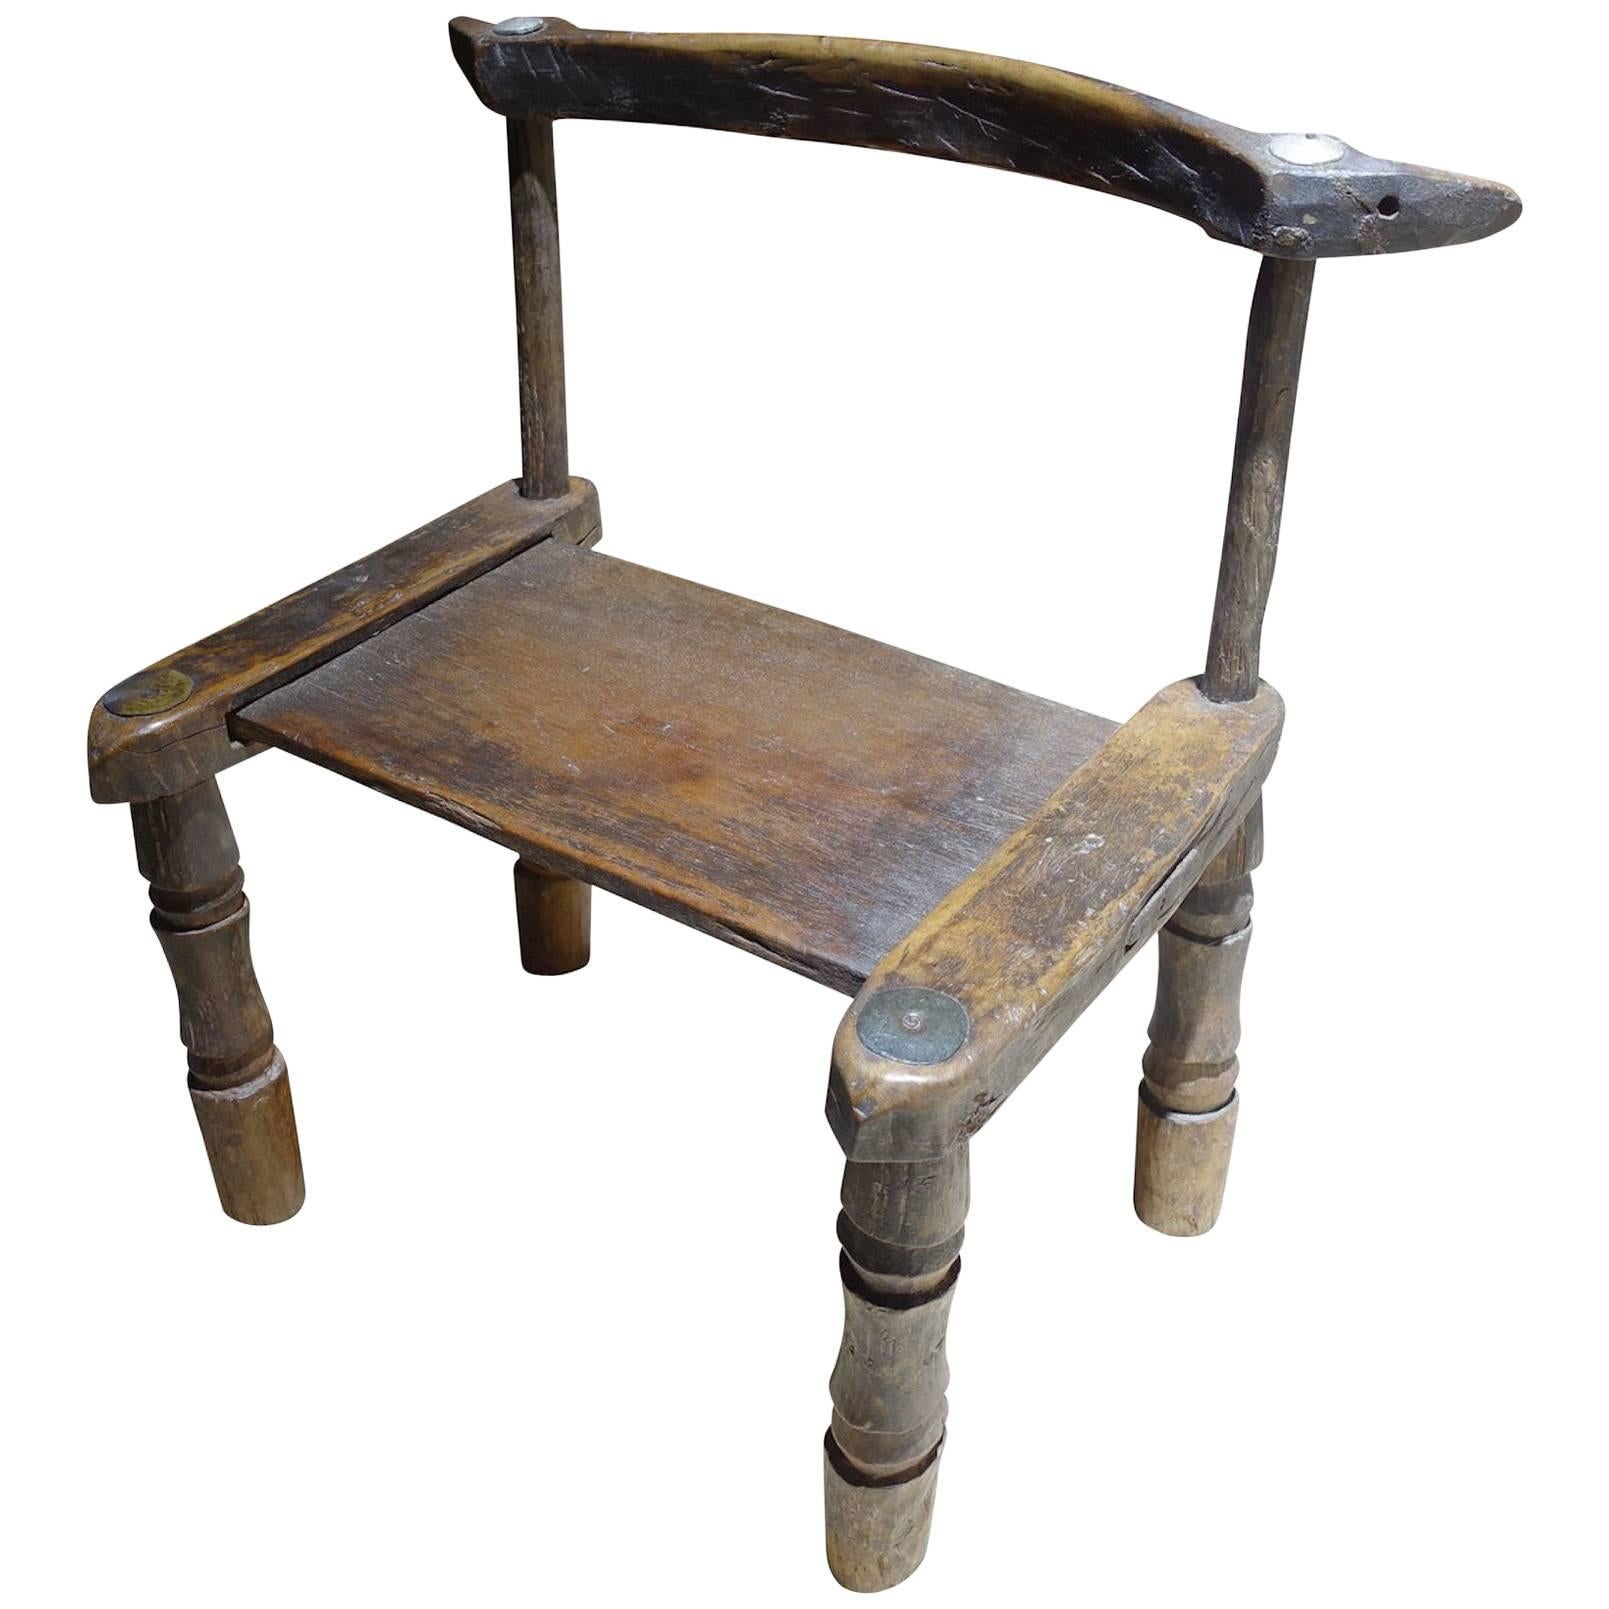 19th Century African Small Wood Chair, Ivory Coast